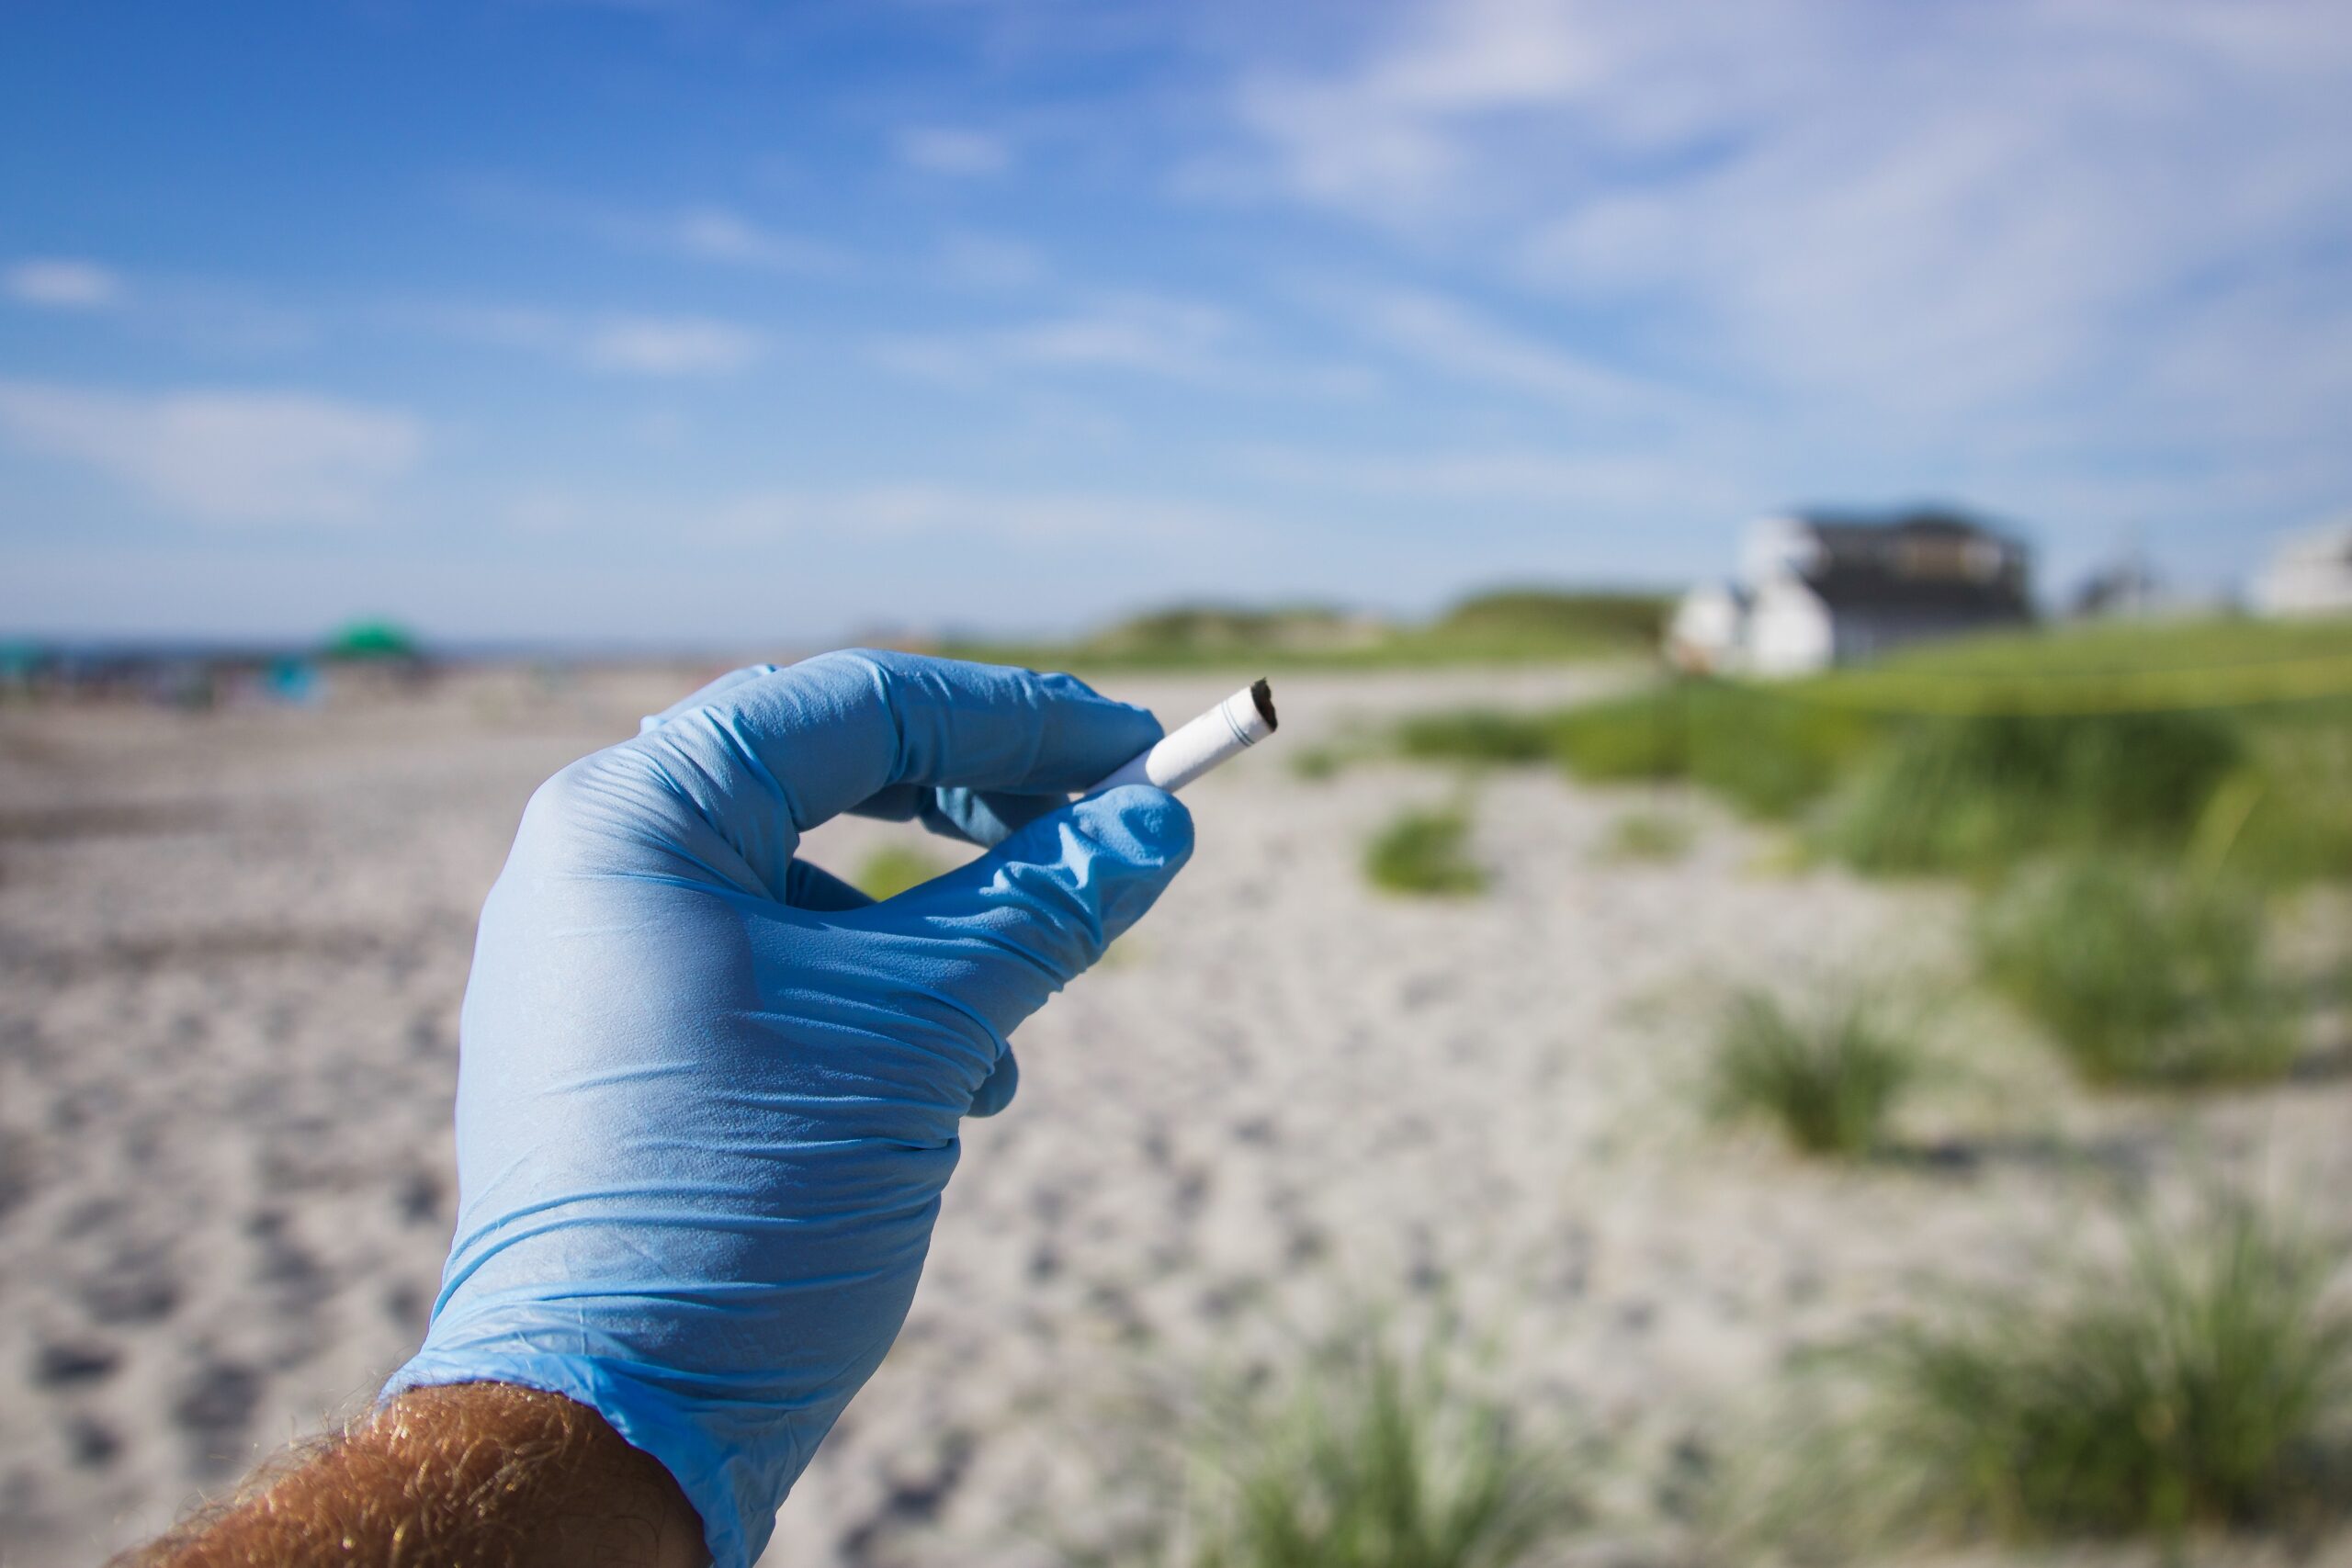 OPINION: Cigarette ban on Florida beaches, parks will help environment